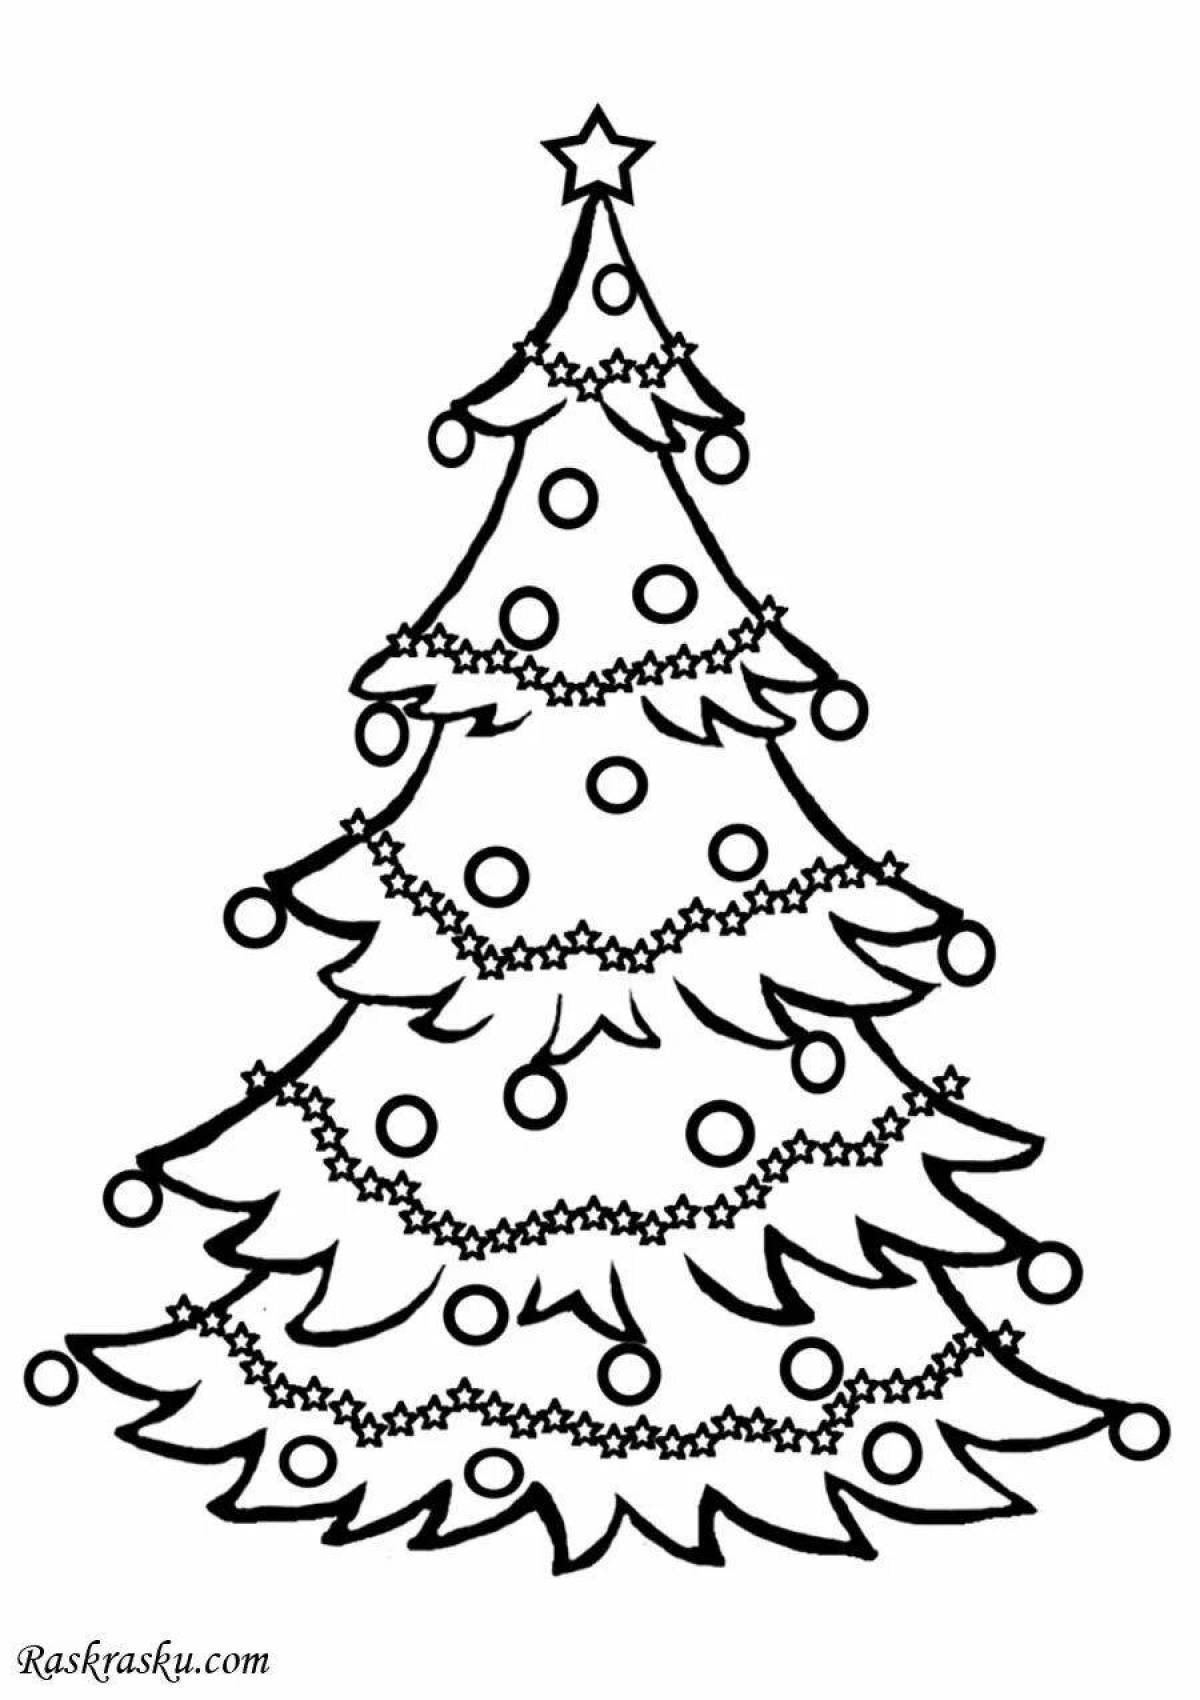 A fun drawing of a Christmas tree for kids